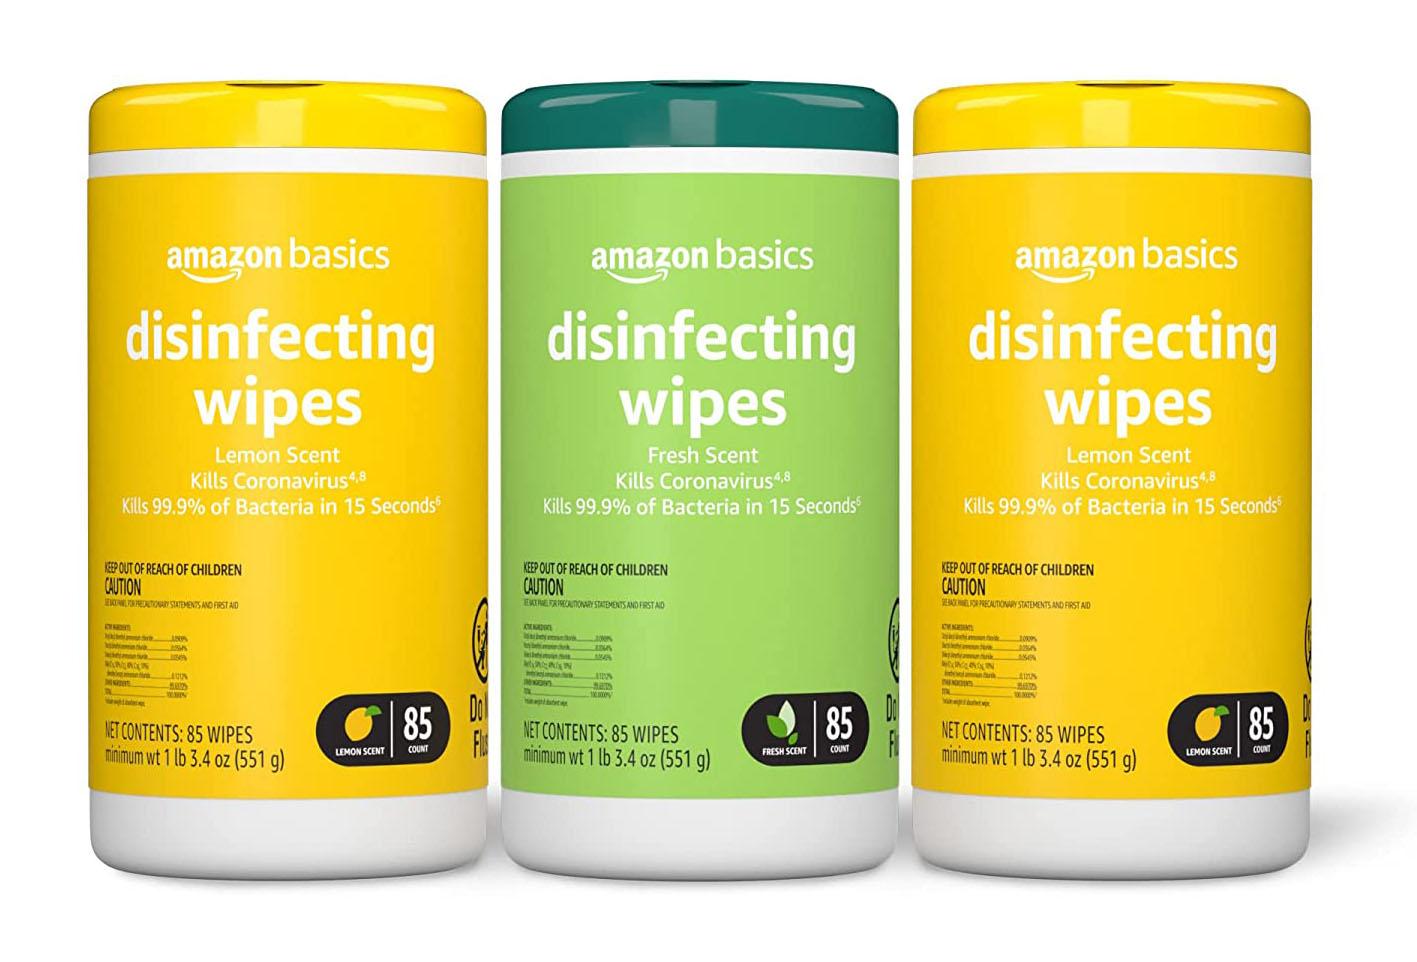 Amazon Brand Solimo Disinfecting Wipes 3 Pack for $7.11 Shipped